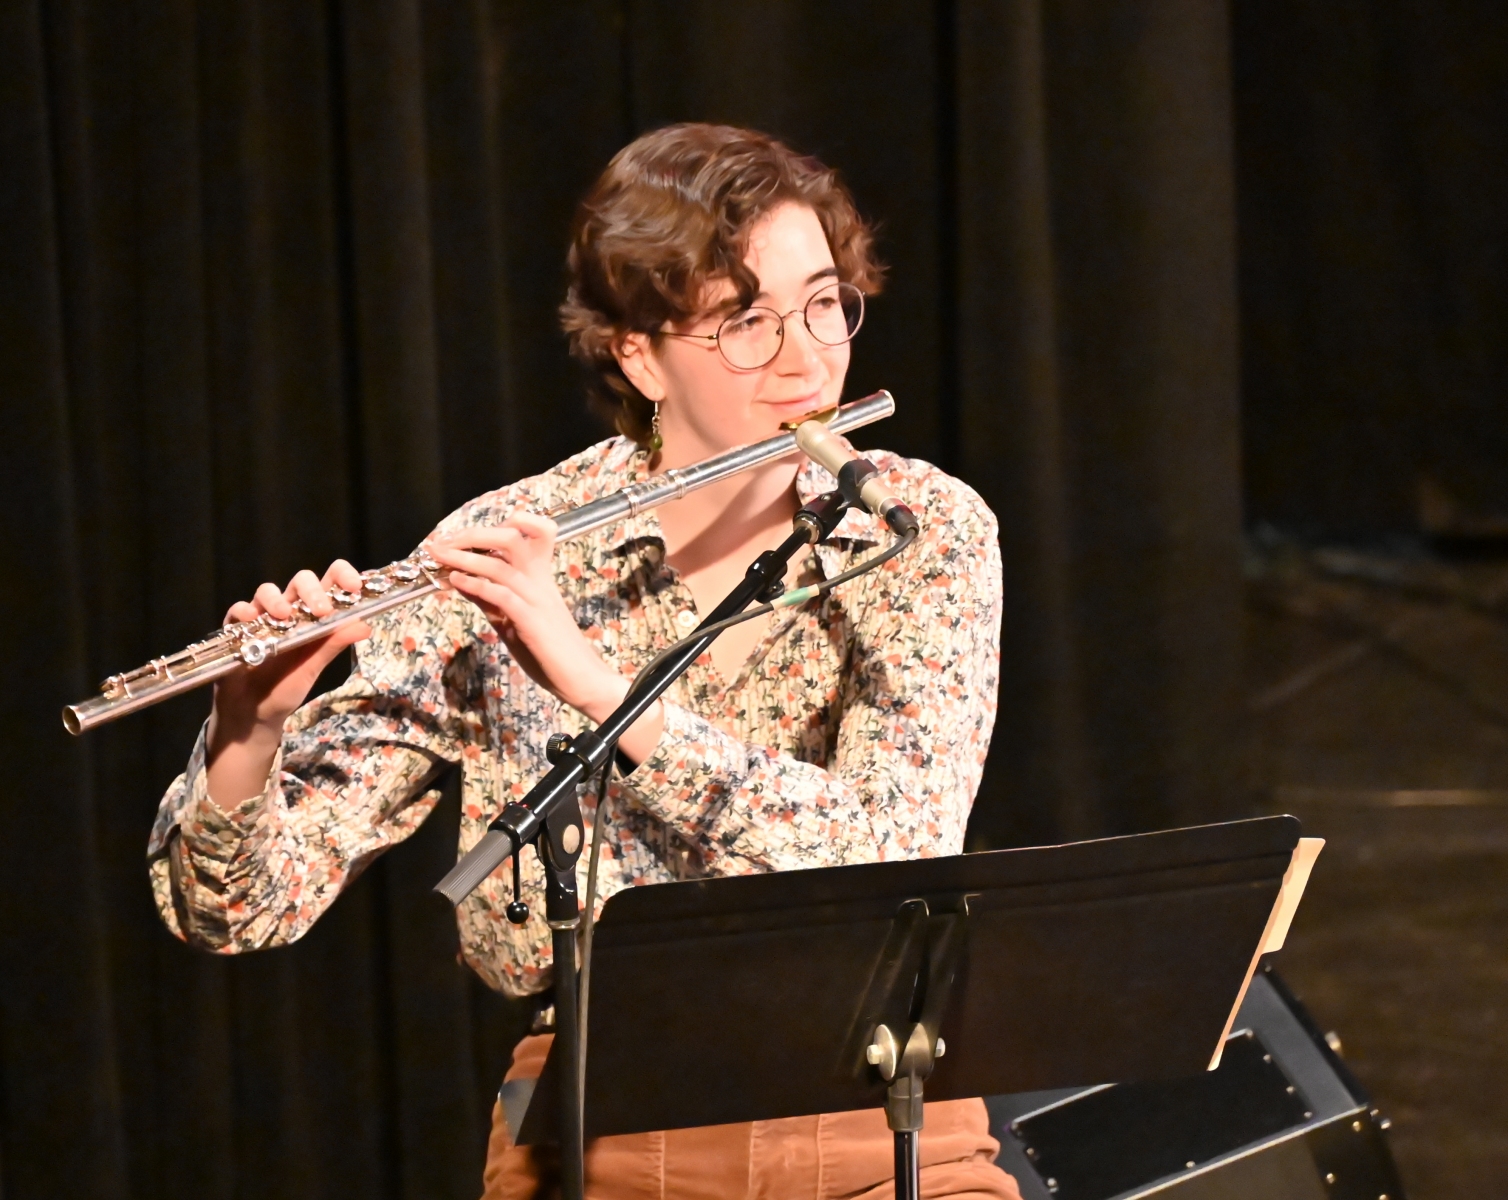 Cal Wiese performs flute in concert